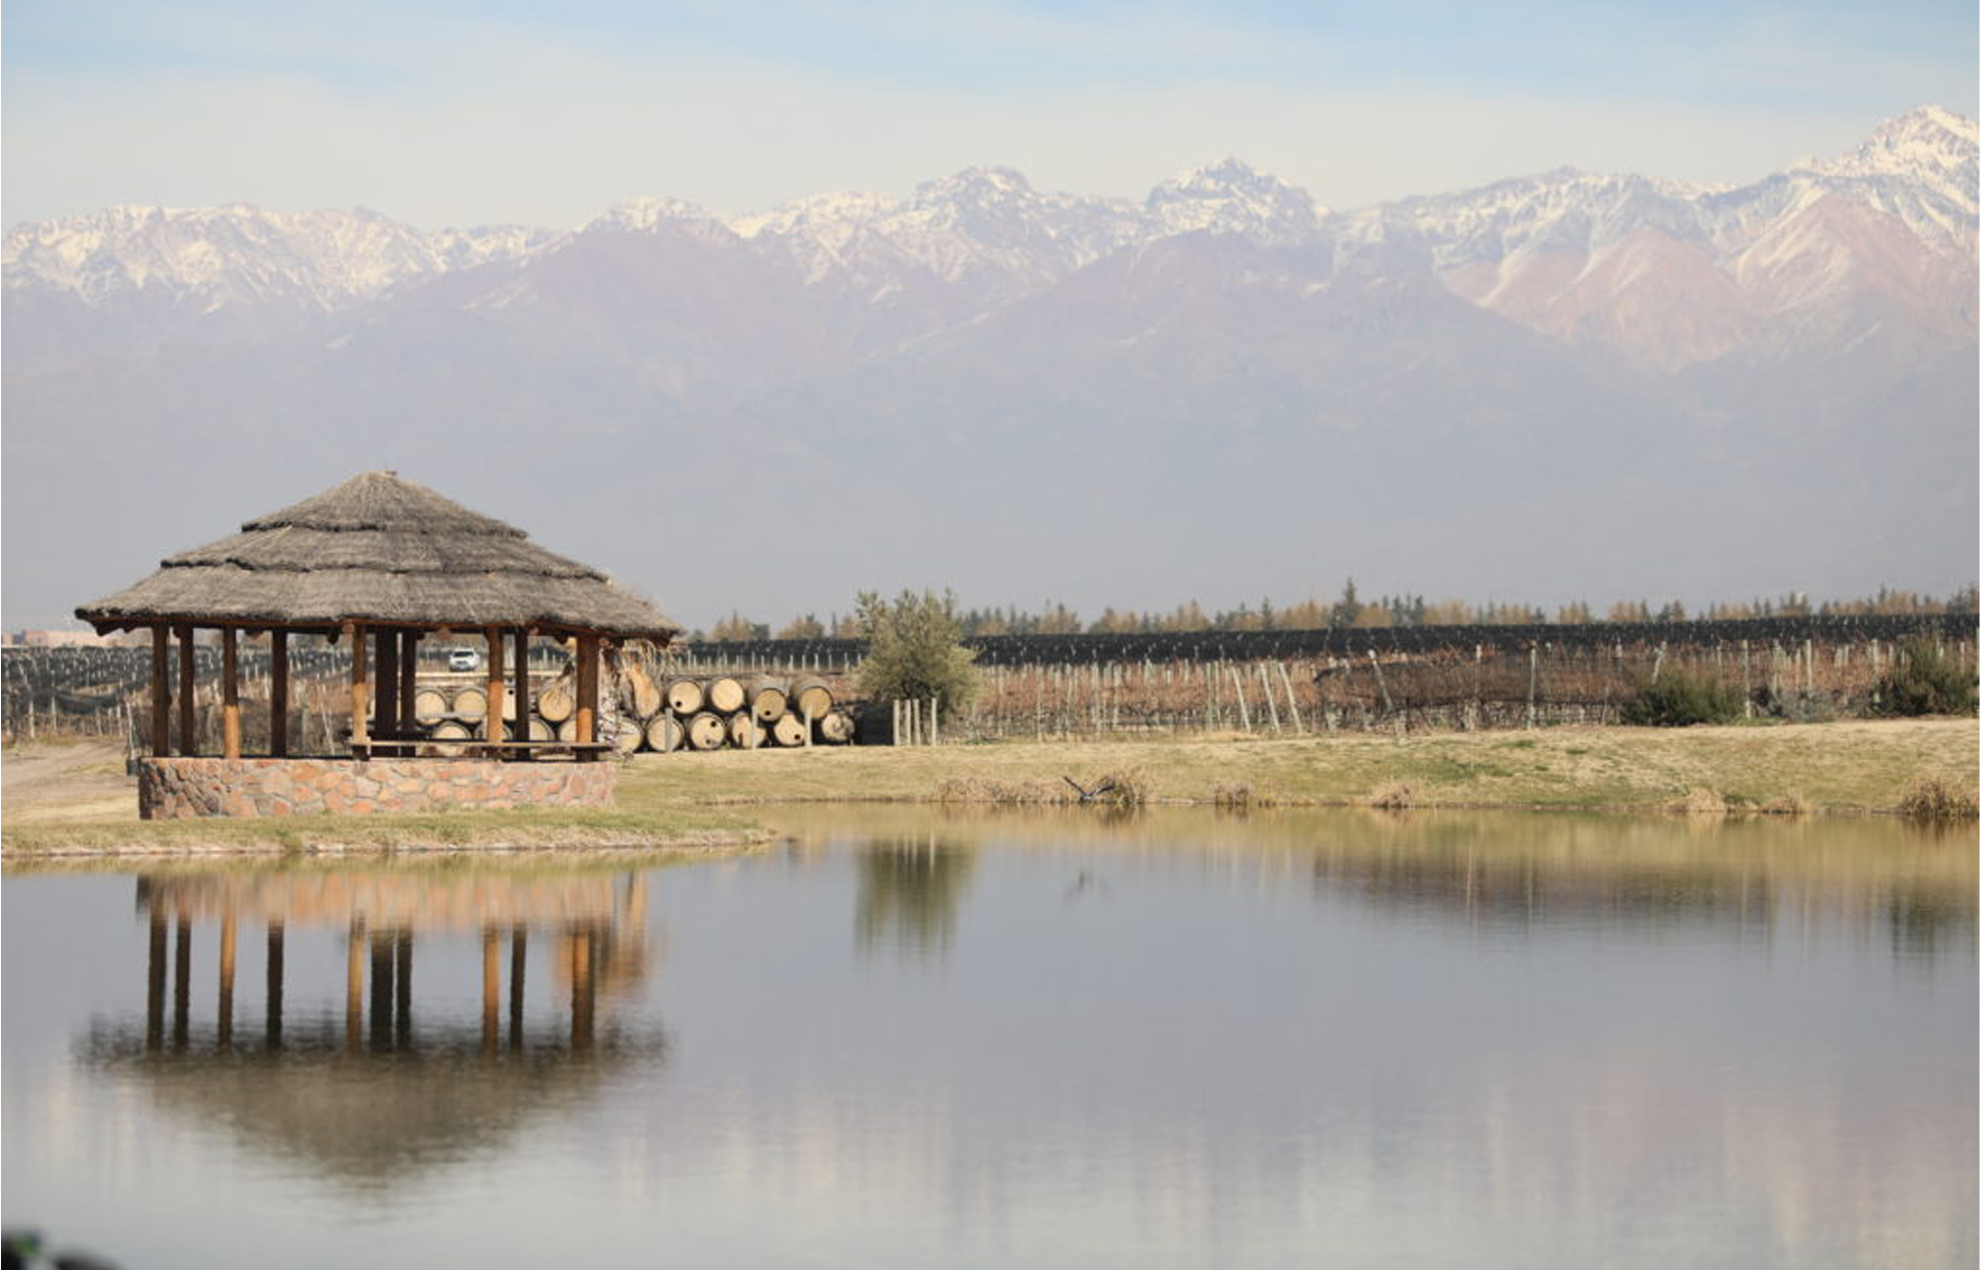 A straw hut in a pond with a scenic view of a large mountain range.